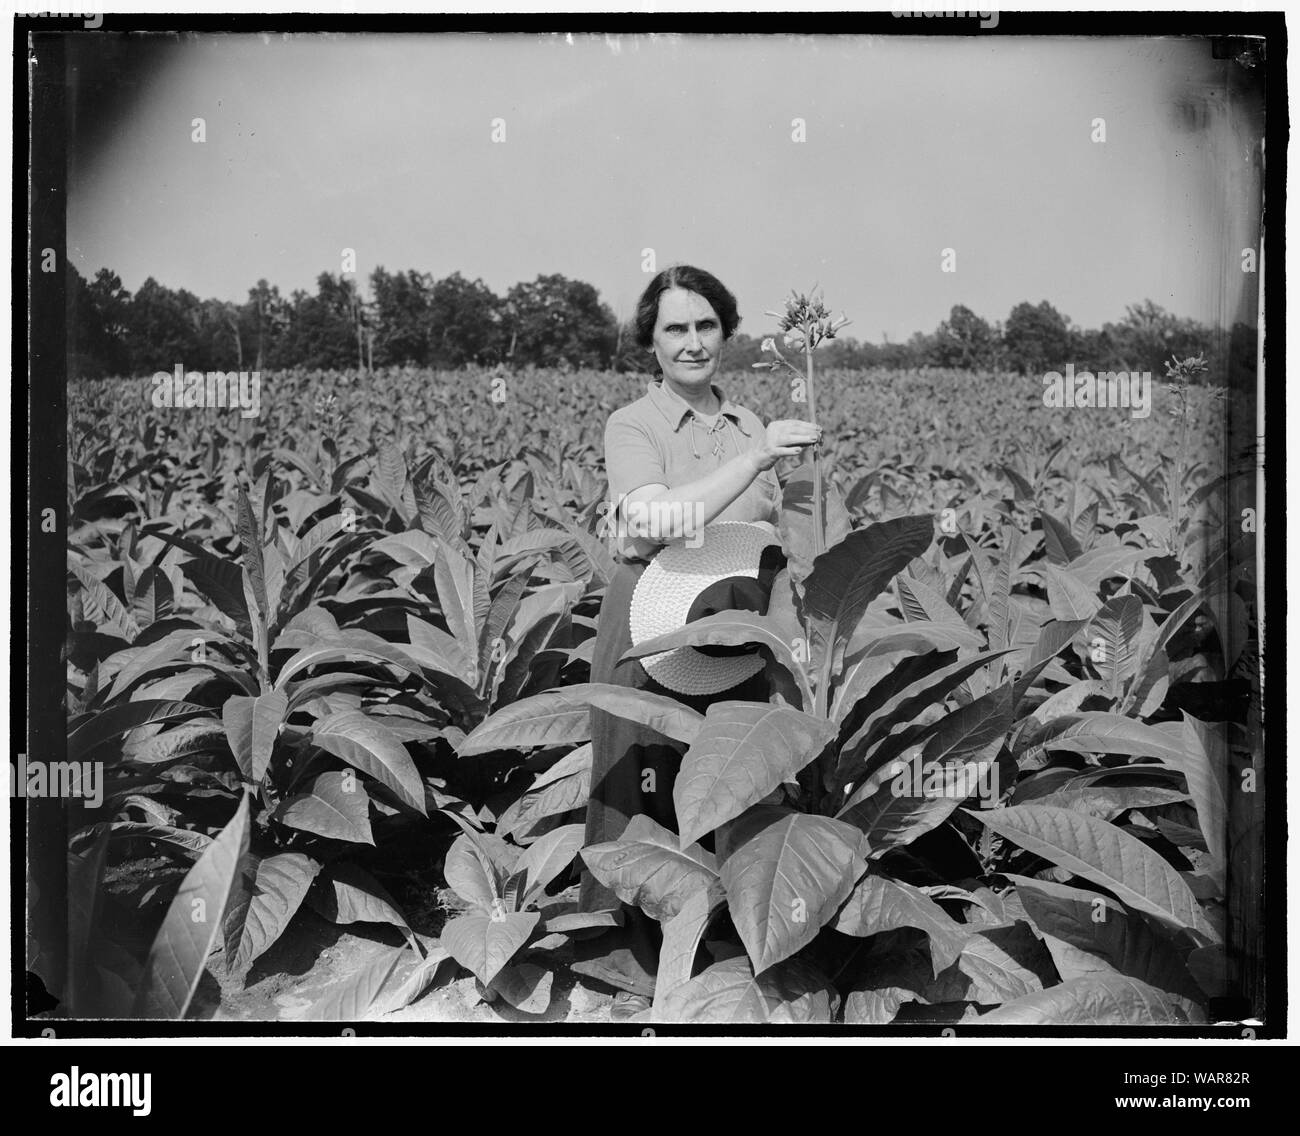 Director of Mint now Maryland farmer. Solomons Island, Md., July 29. It's a far cry from the plains of Wyoming to Maryland farm, but Director of Mint Nellie Tayloe Ross bridged the gap when she acquired 200 acres here including 100 year old house. While the principal crop is tobacco, Mrs. Ross is equally proud of the branch tomatoes raised on the property Stock Photo